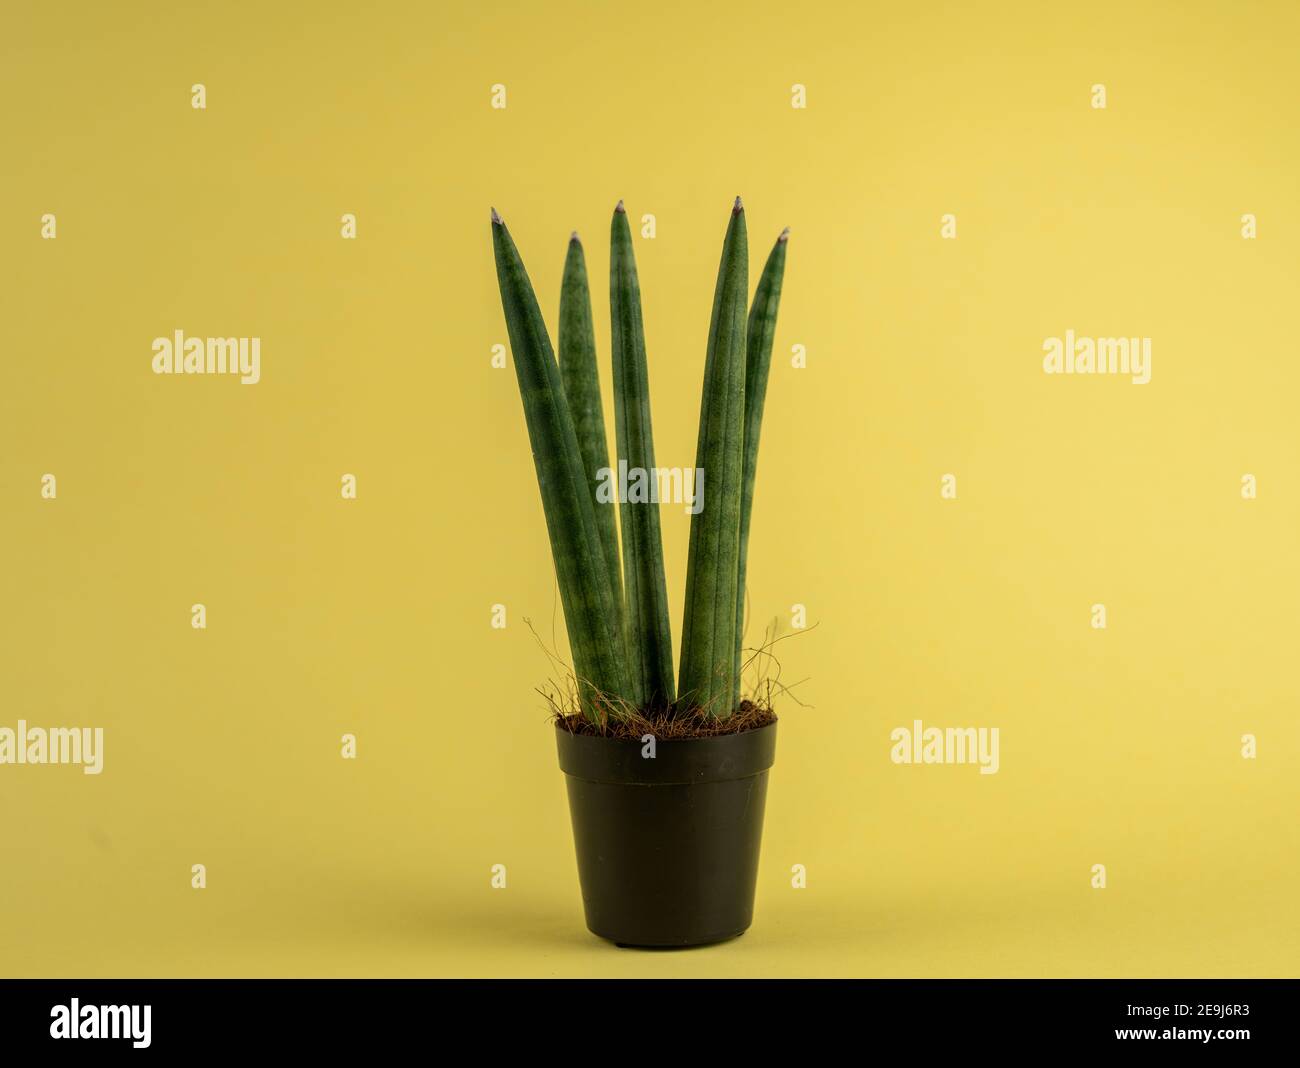 sansevieria cylindrica in pot with yellow background Stock Photo